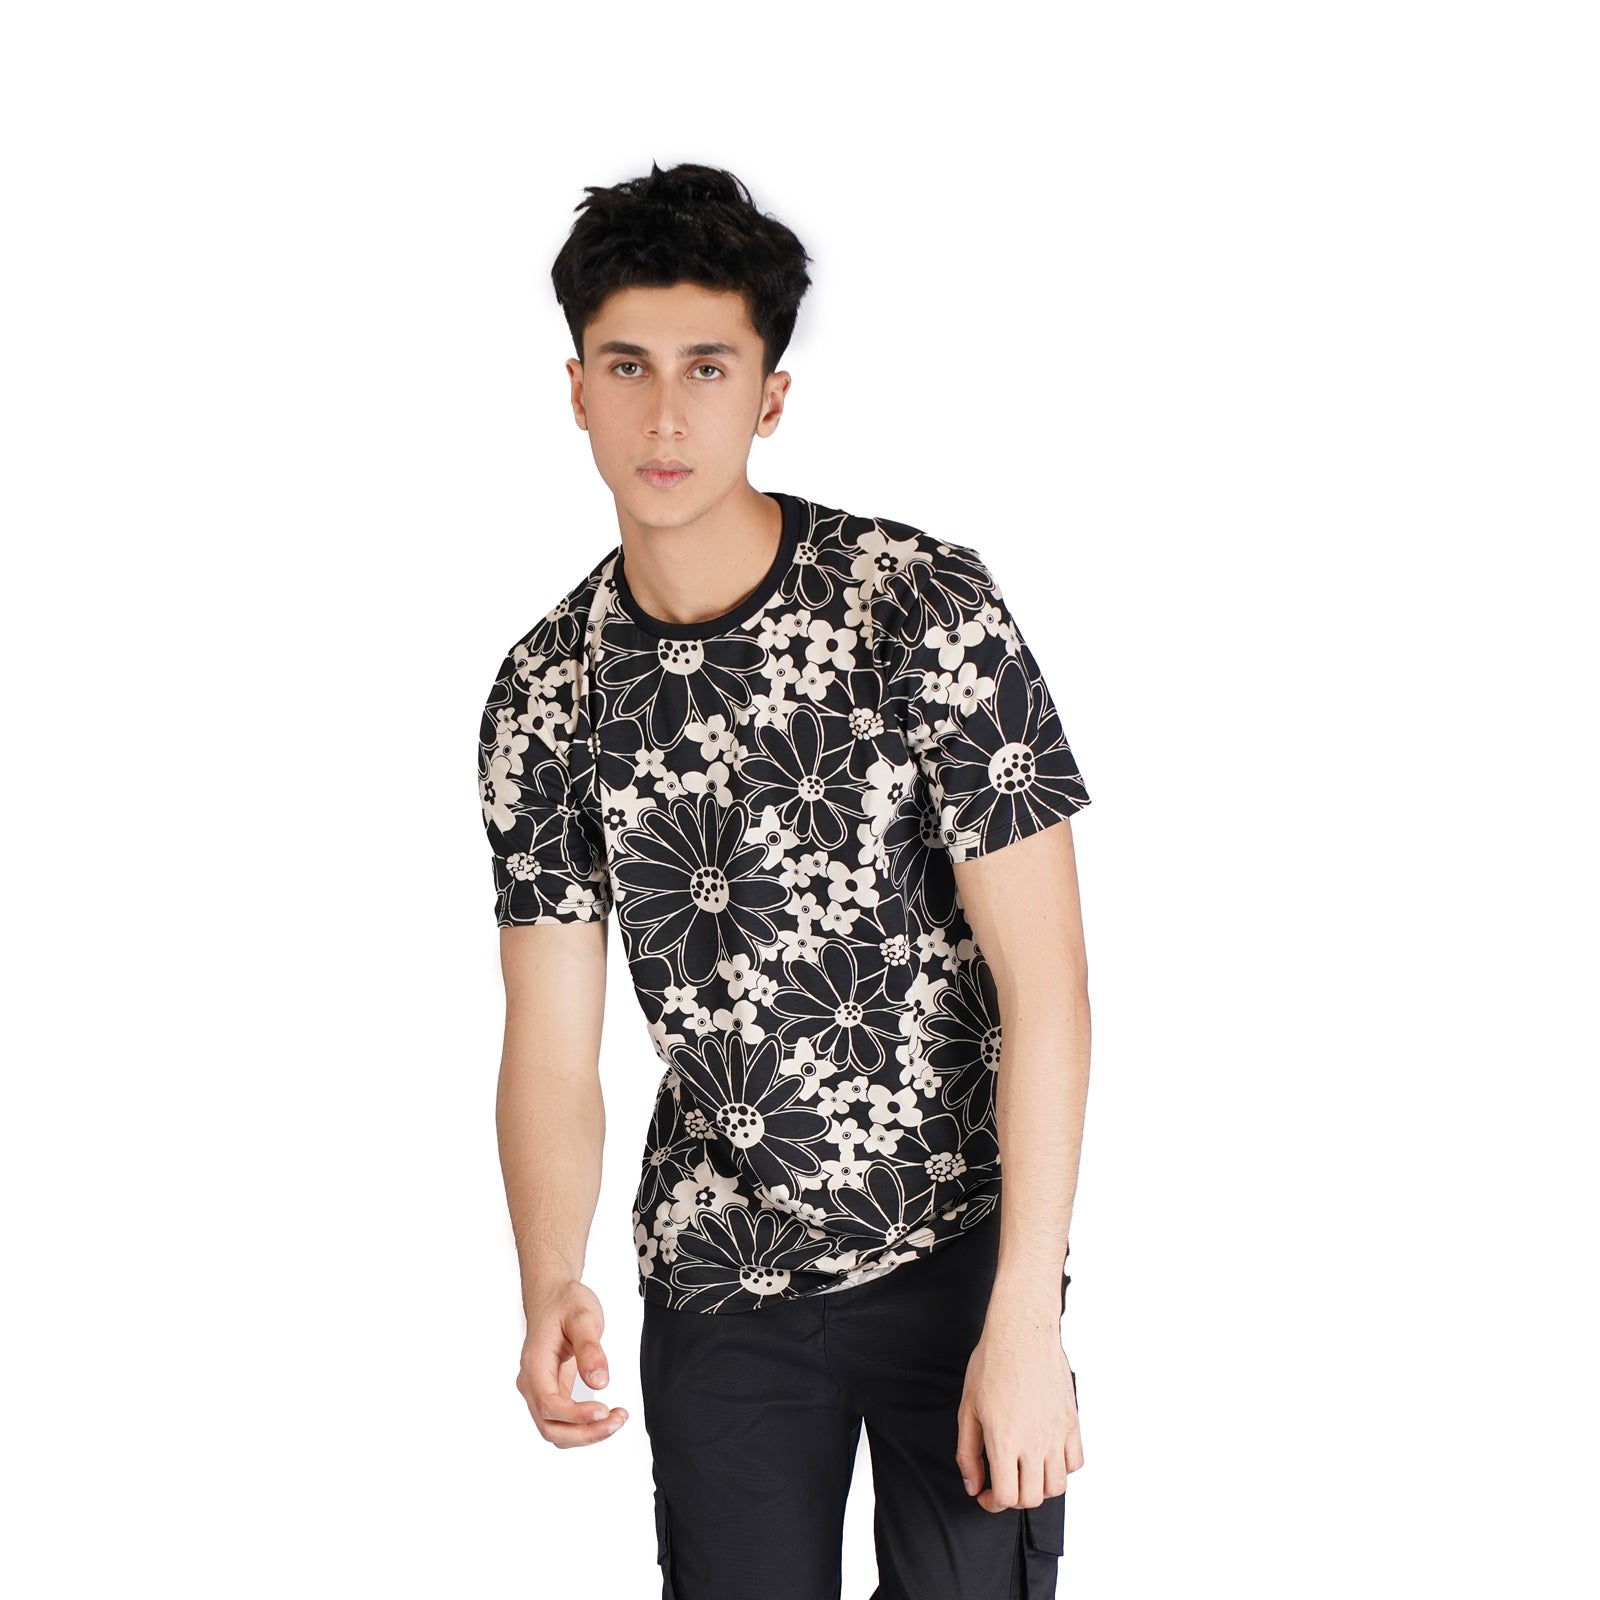 Beige and Black Printed T-Shirt - OSSM1230029